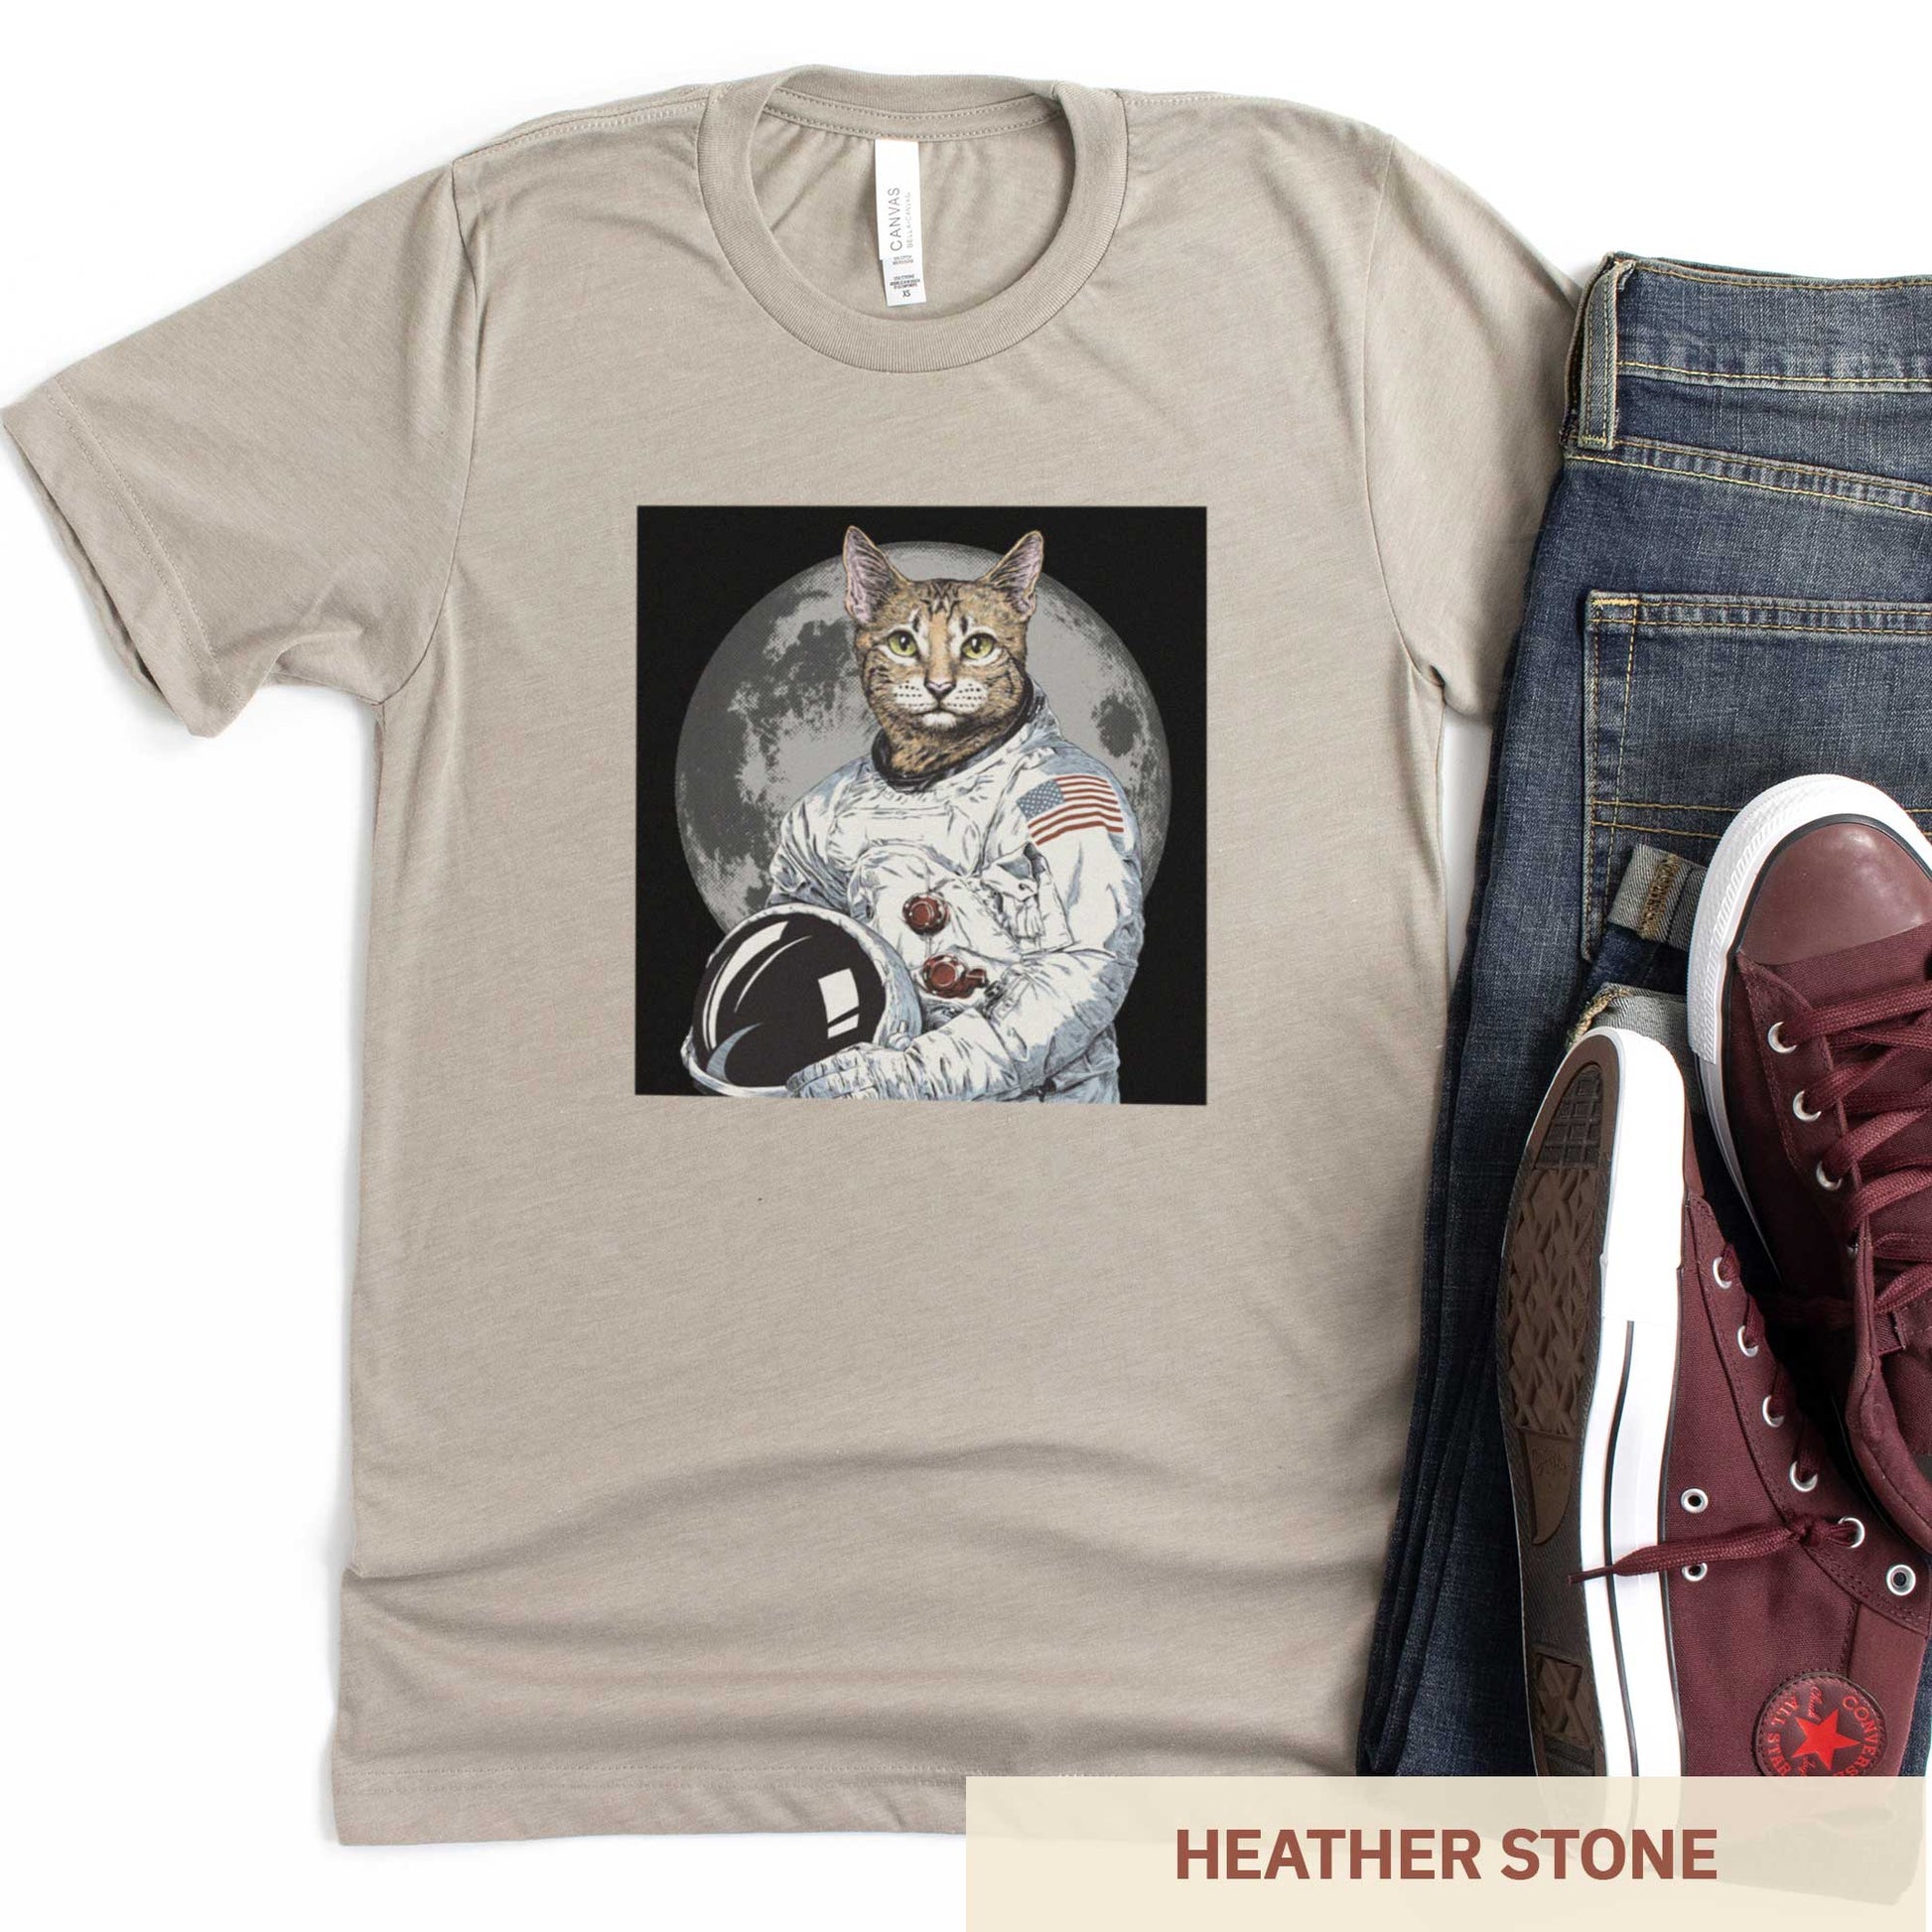 A heather stone Bella Canvas t-shirt featuring an illustrated portrait of a cat as a NASA astronaut with the moon in the background.